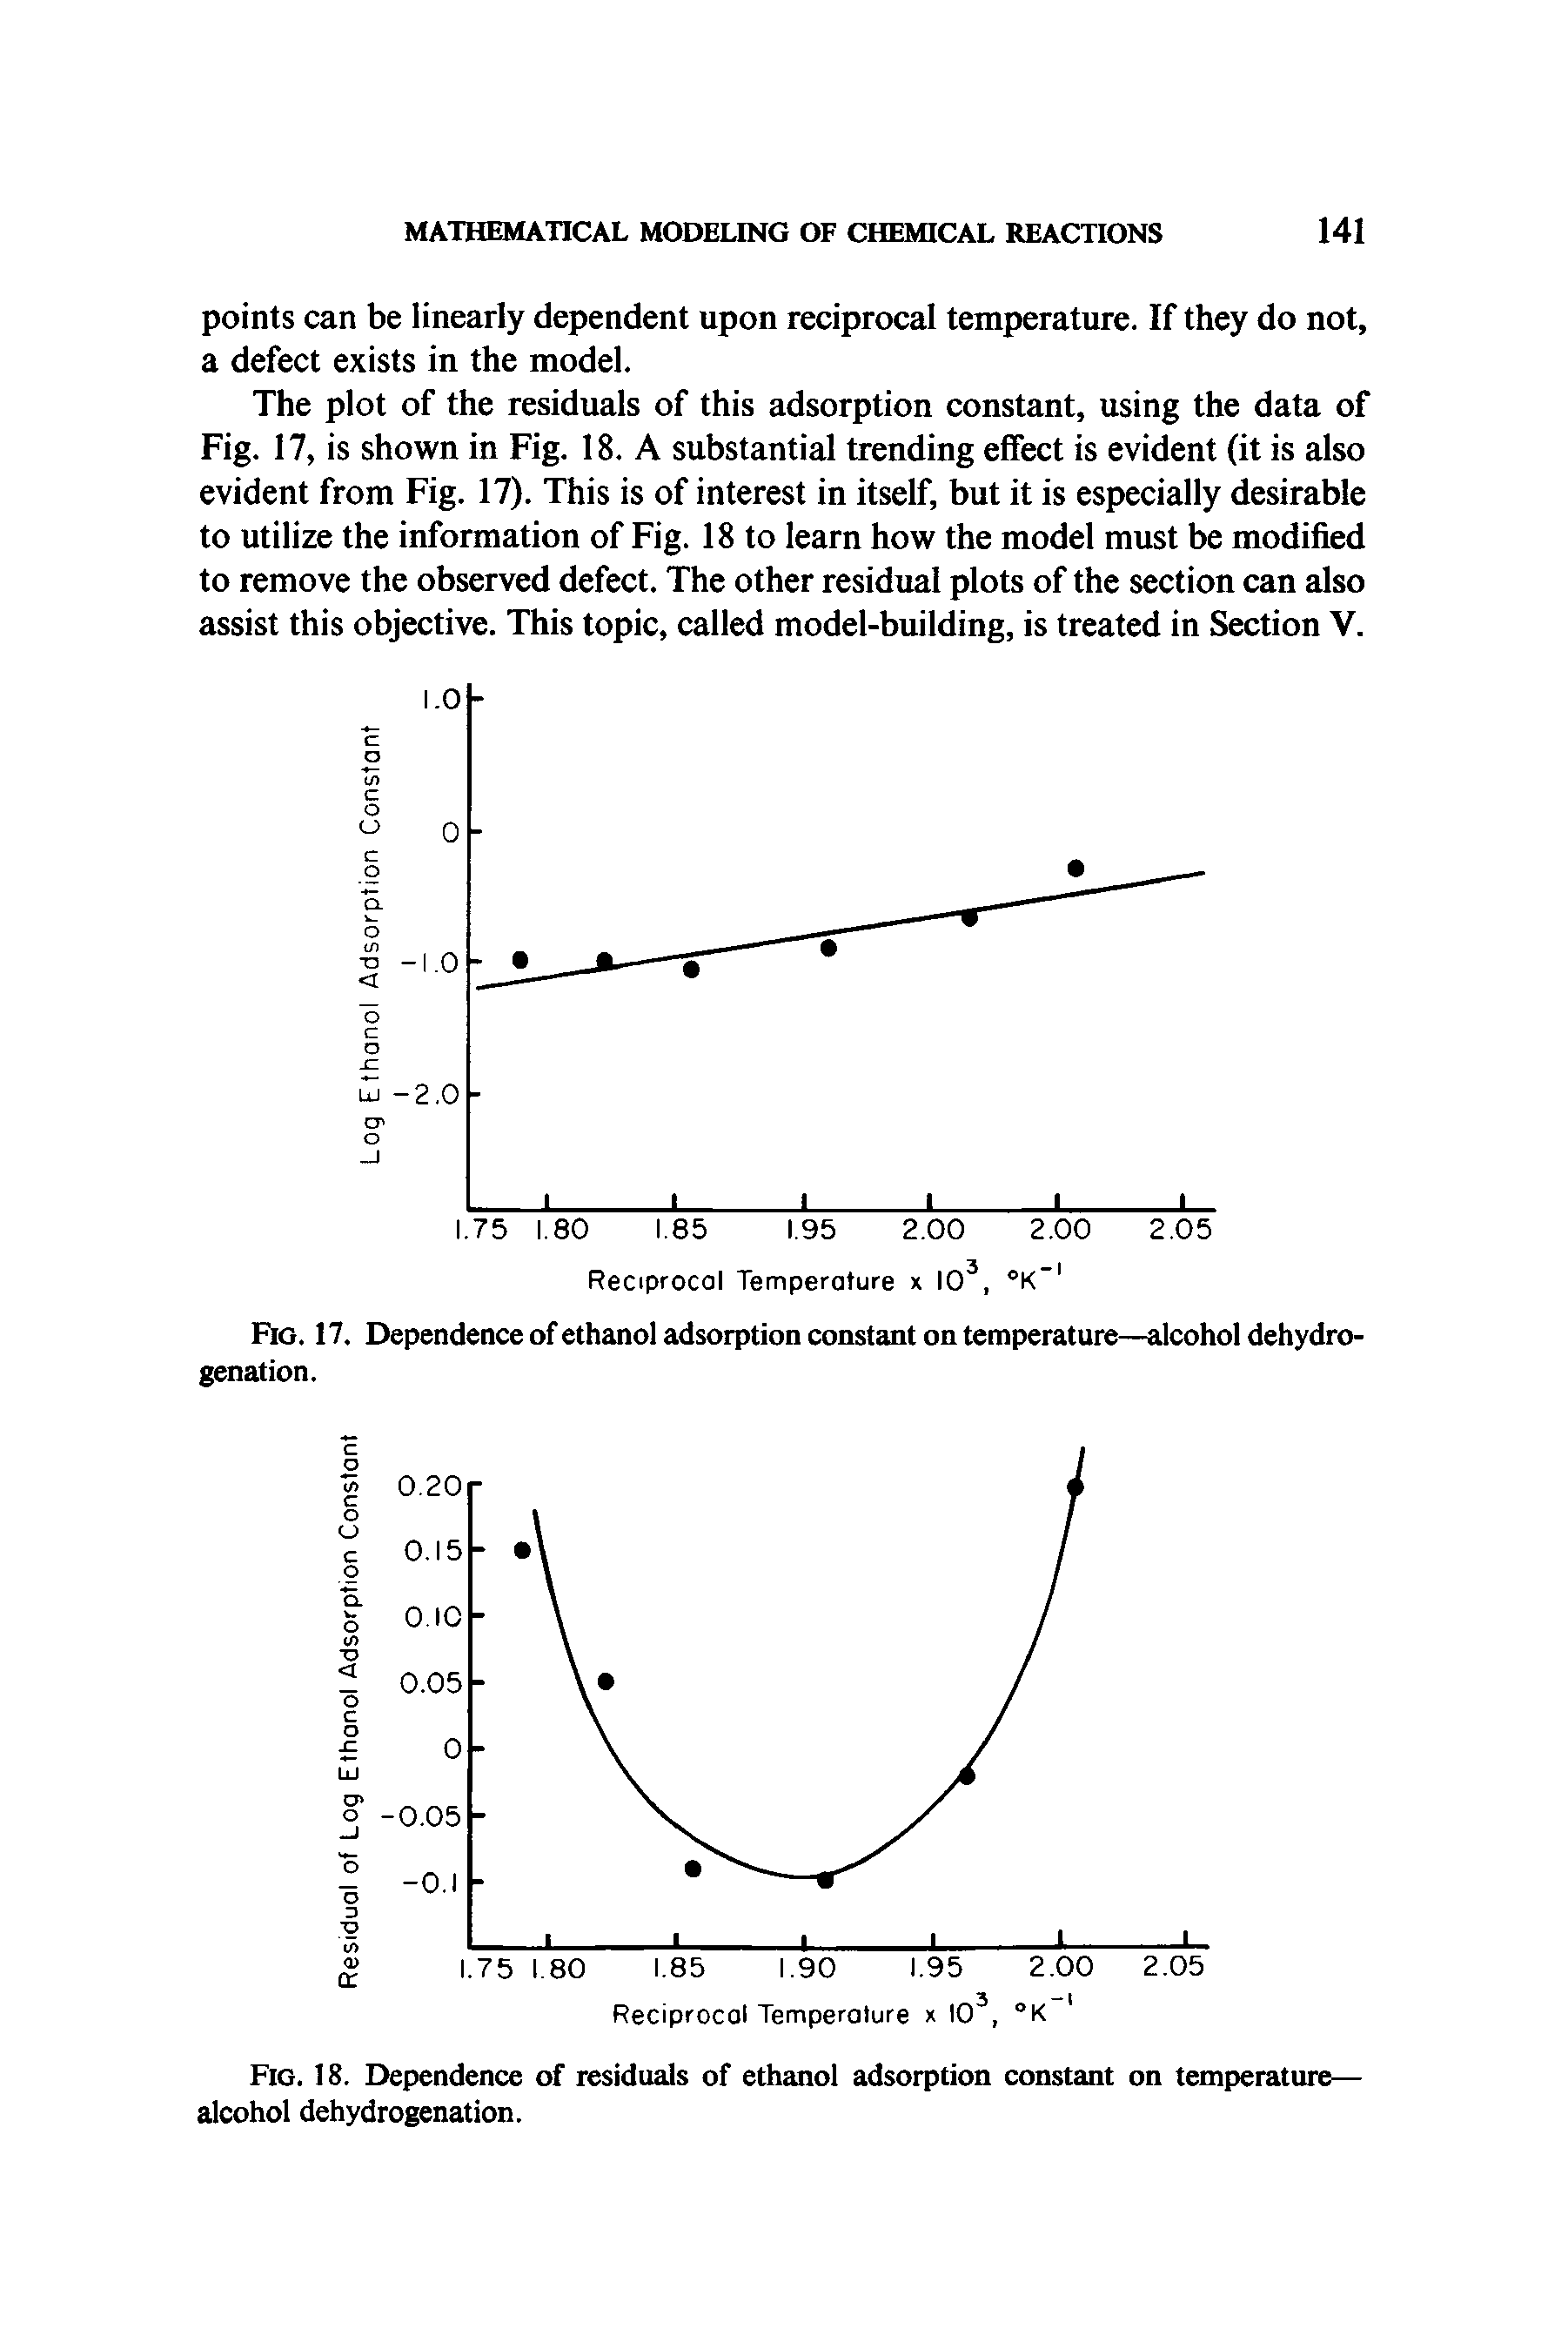 Fig. 17. Dependence of ethanol adsorption constant on temperature—alcohol dehydrogenation.